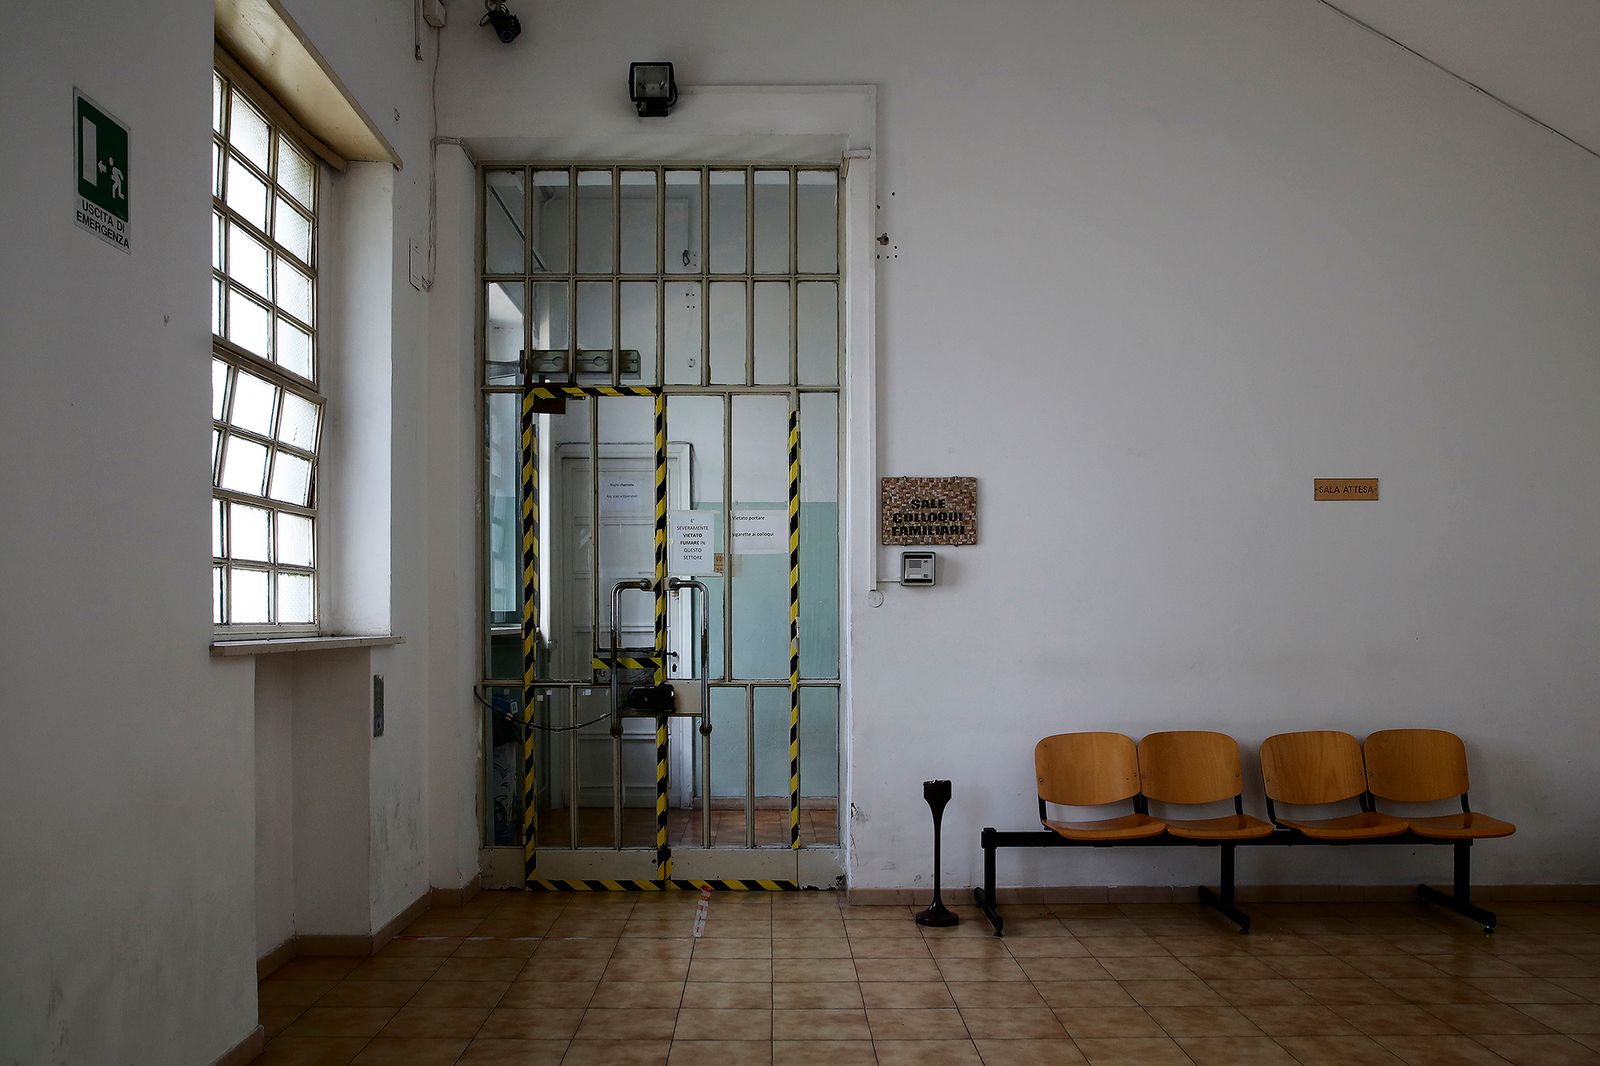 © Francesca Pompei - The entrance of the  visits room  of the women's section of Rome's Rebibbia prison.